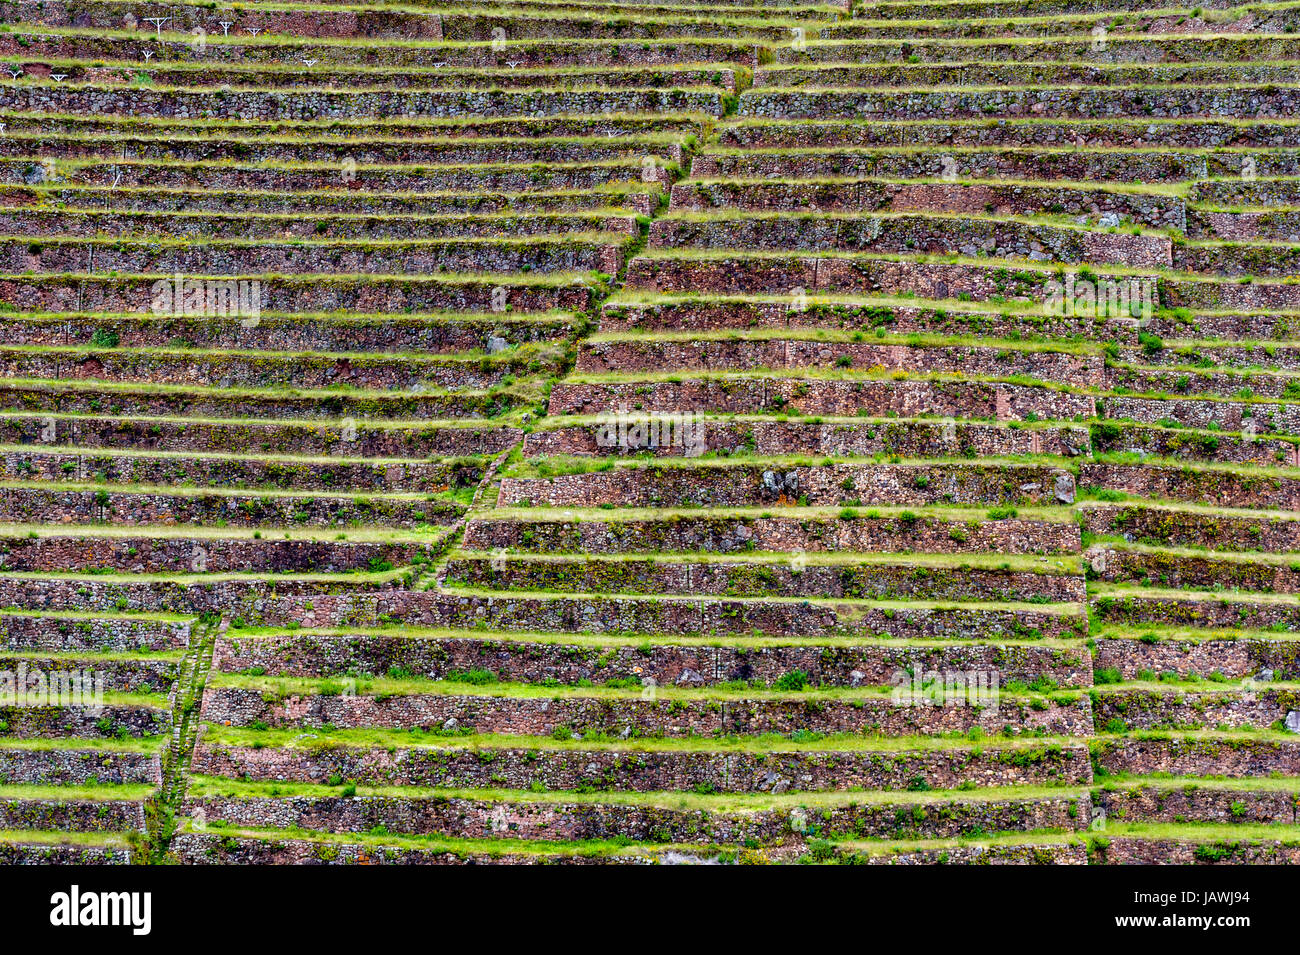 The Inca constructed agricultural terraces on the steep hillside. Stock Photo